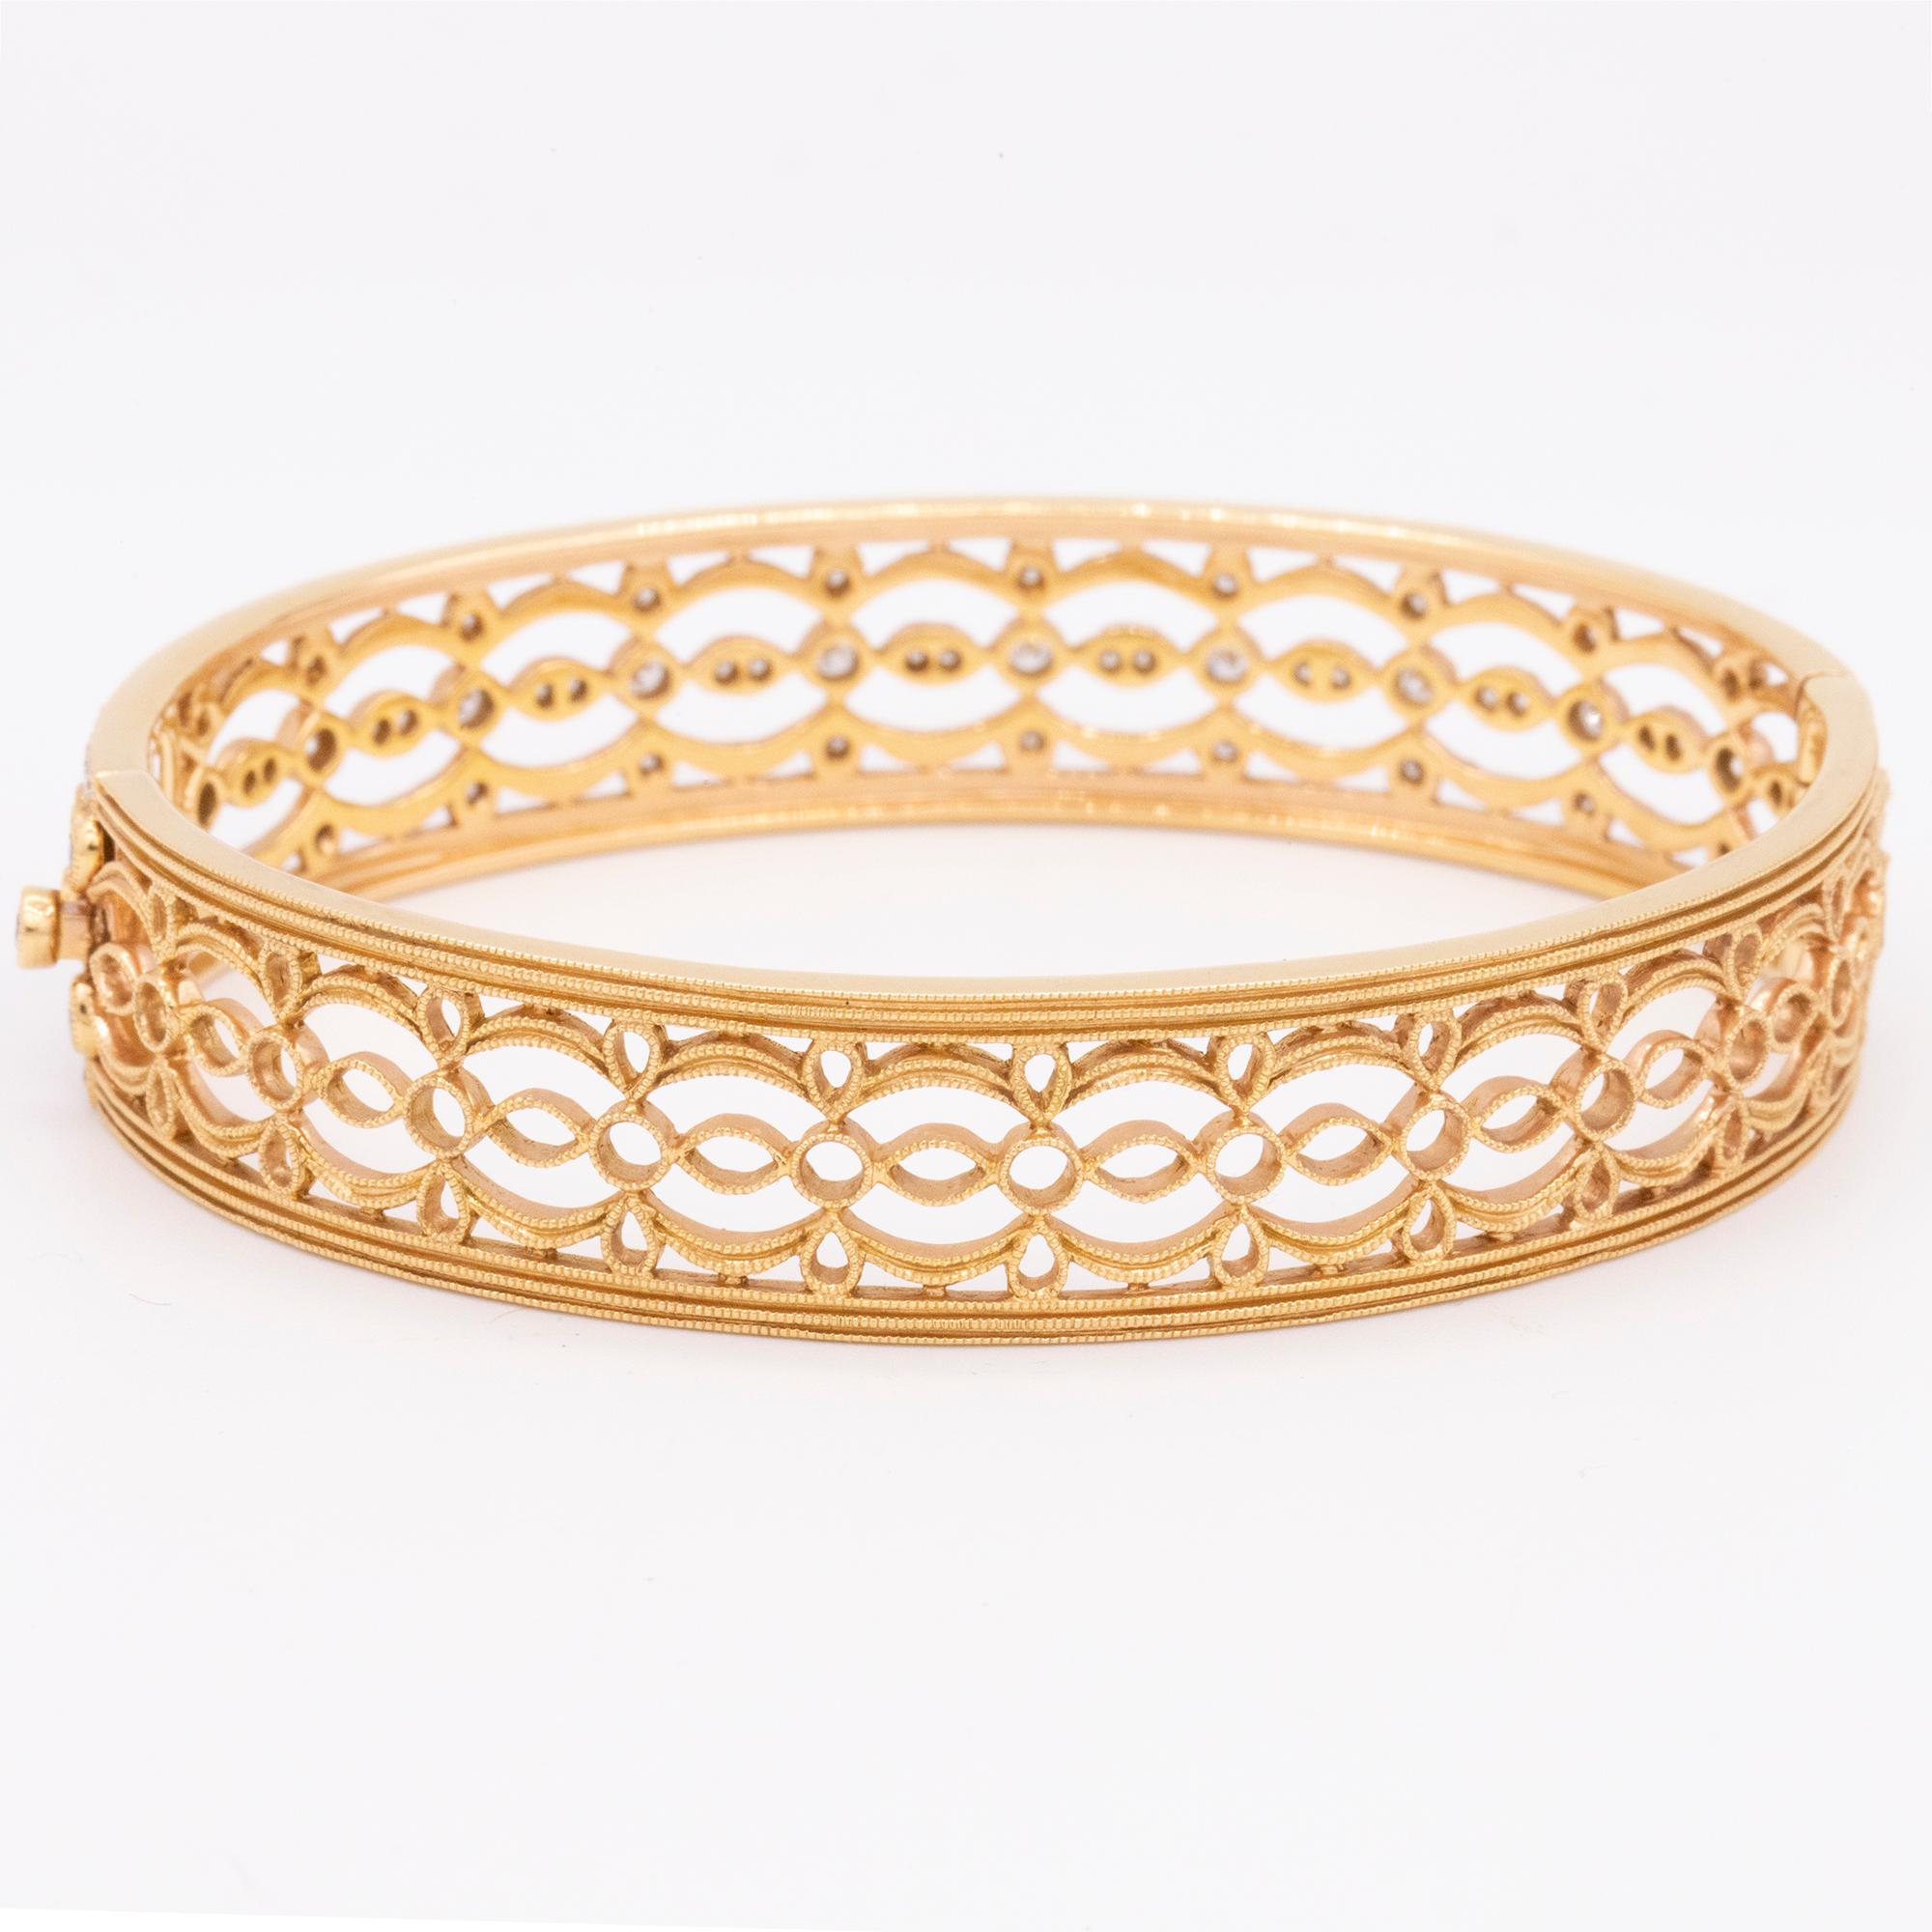 From the Hamilton Jewelers Heritage Collection, this diamond bangle bracelet combines old world details with timeless design. Beautiful filigree work and milgrain edges are in 18k rose gold. This bangle is 12mm wide and showcases 213 round brilliant